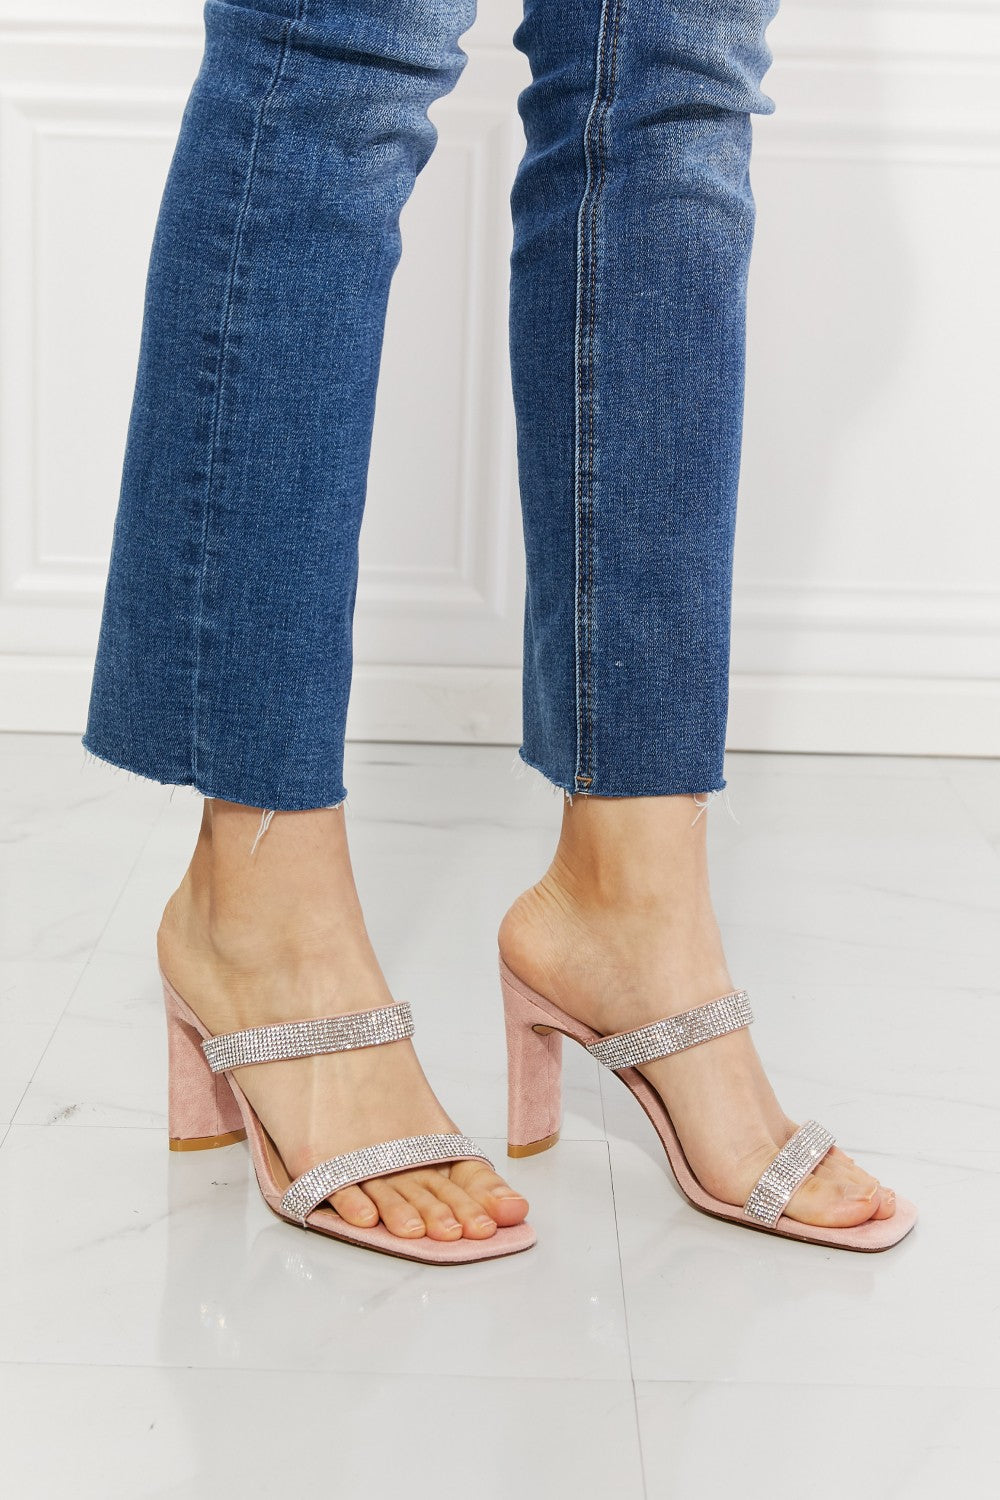 MMShoes Leave A Little Sparkle Rhinestone Block Heel Sandal in Pink  Southern Soul Collectives 